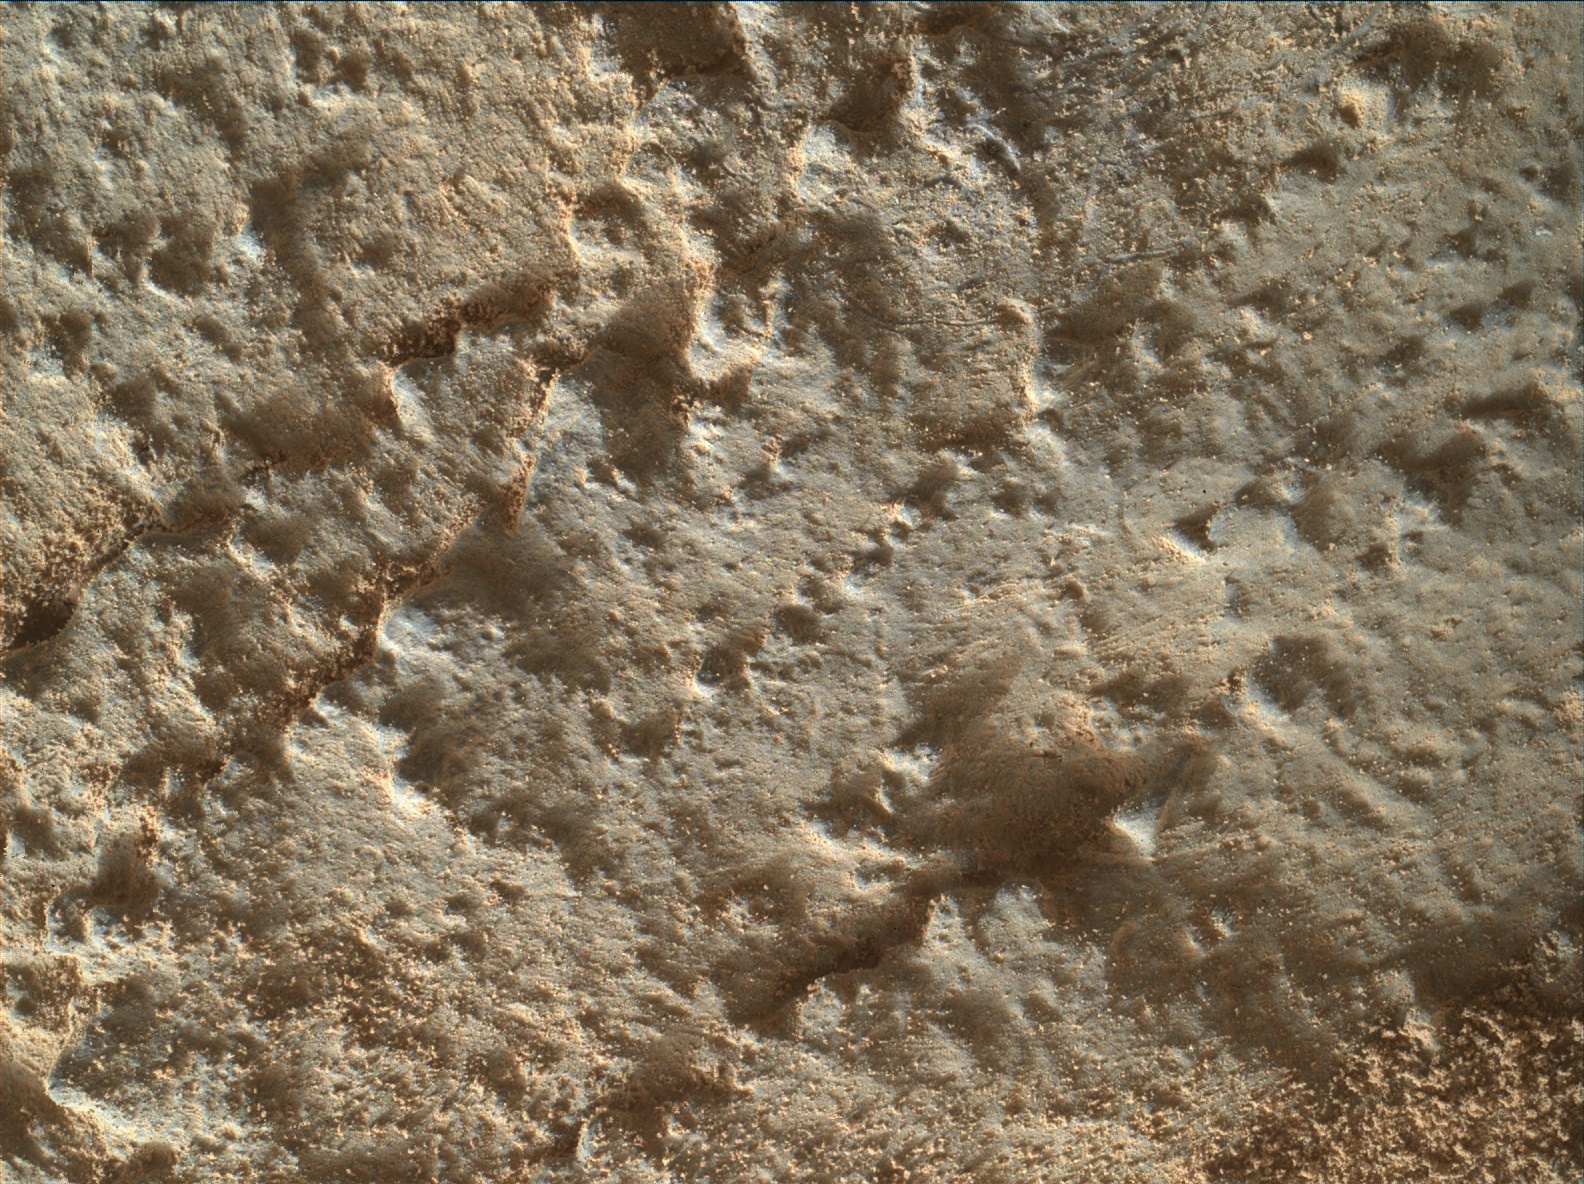 Nasa's Mars rover Curiosity acquired this image using its Mars Hand Lens Imager (MAHLI) on Sol 1106